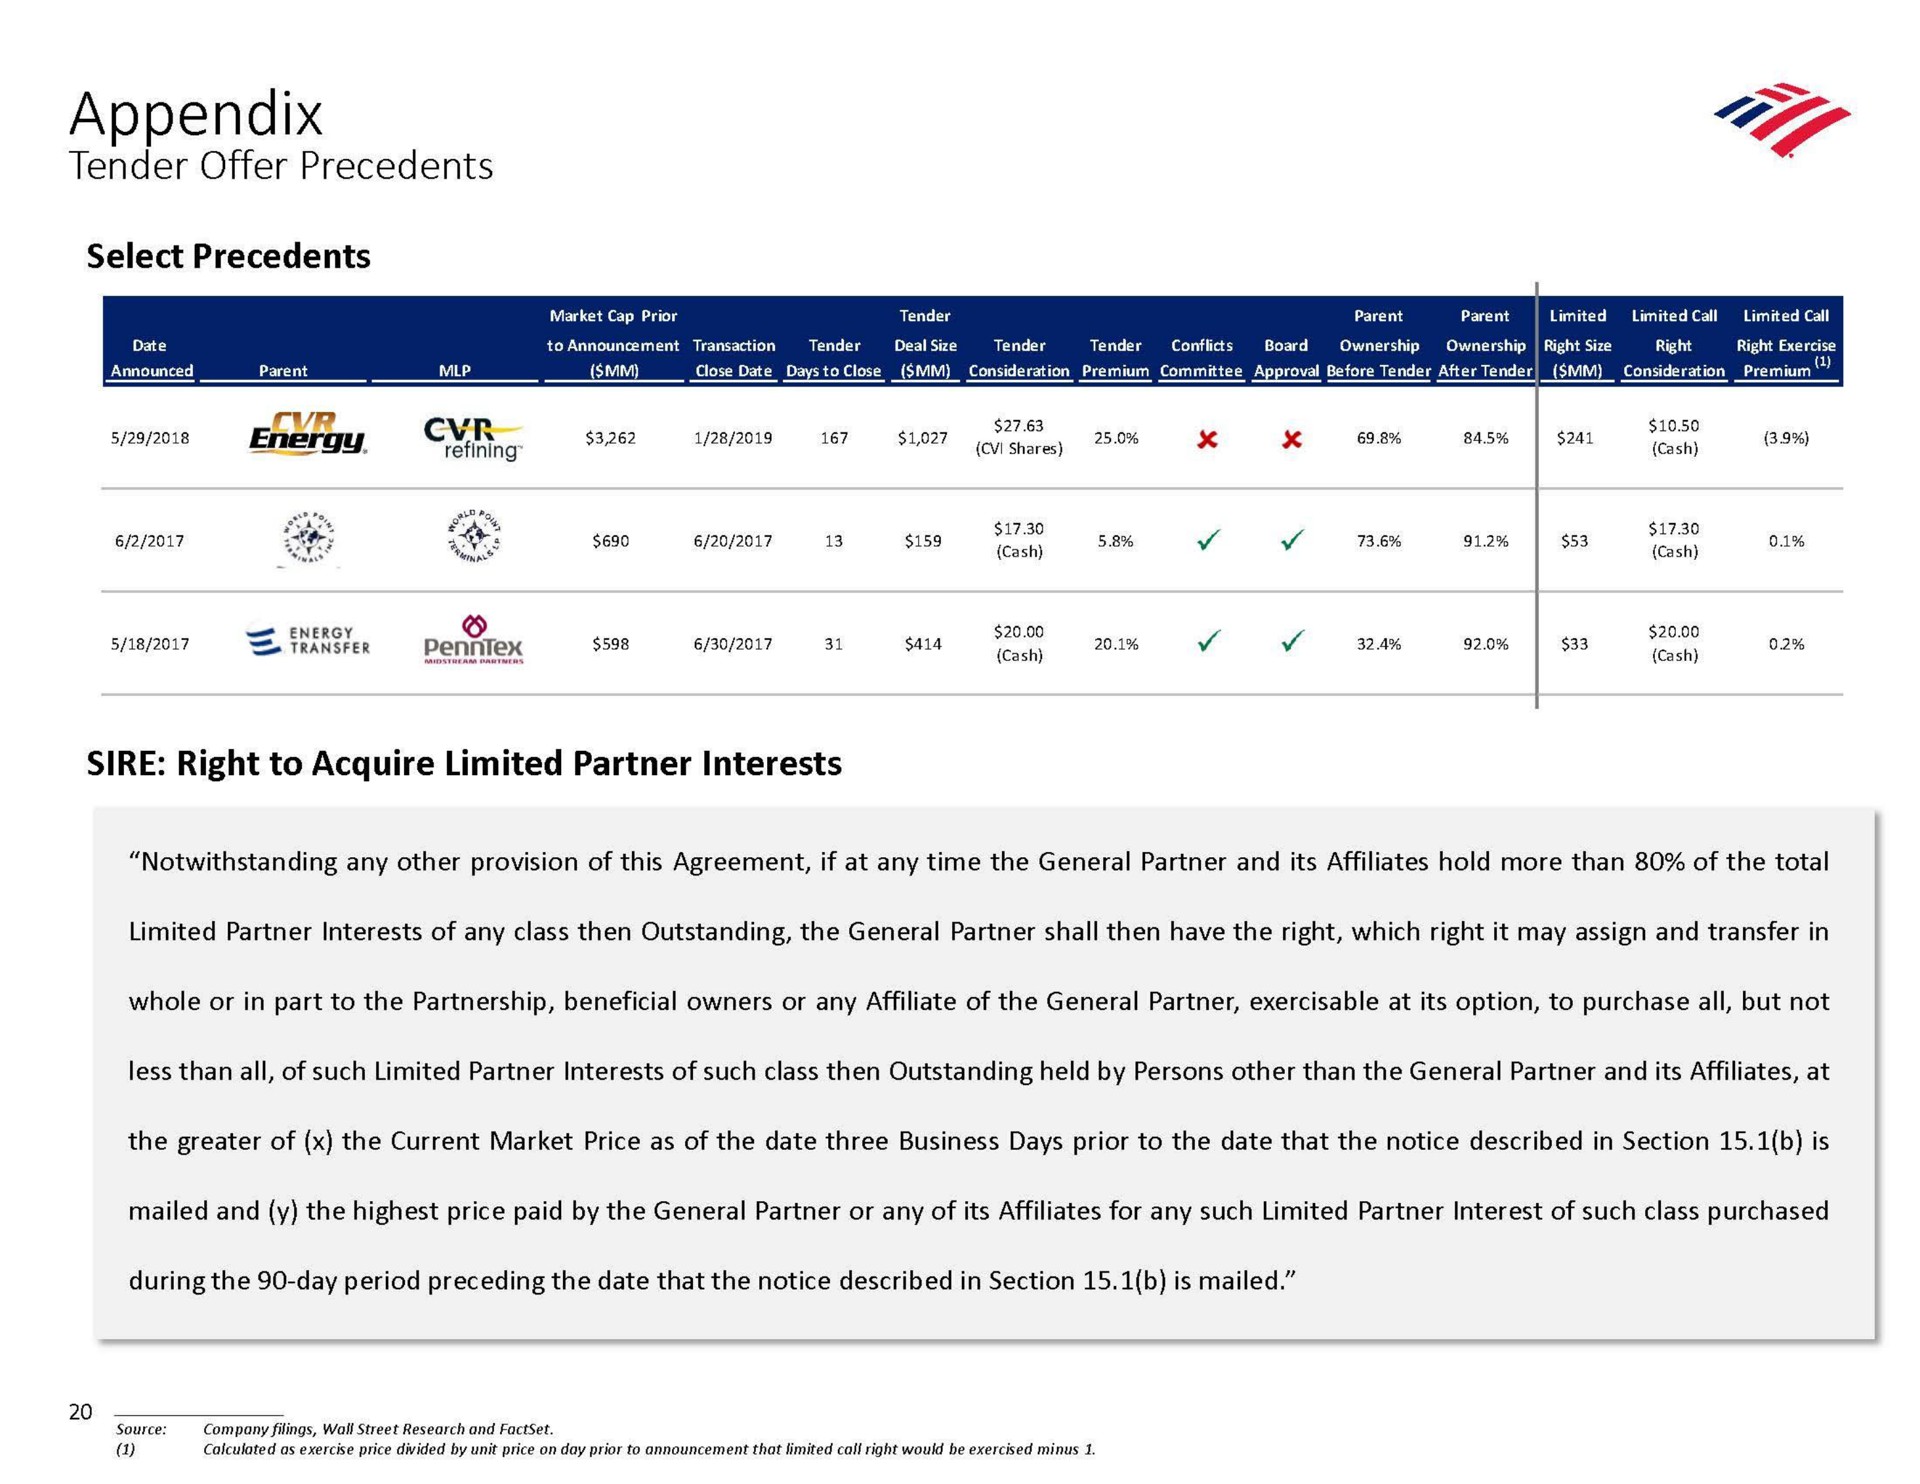 appendix tender offer precedents select precedents sire right to acquire limited partner interests | Bank of America